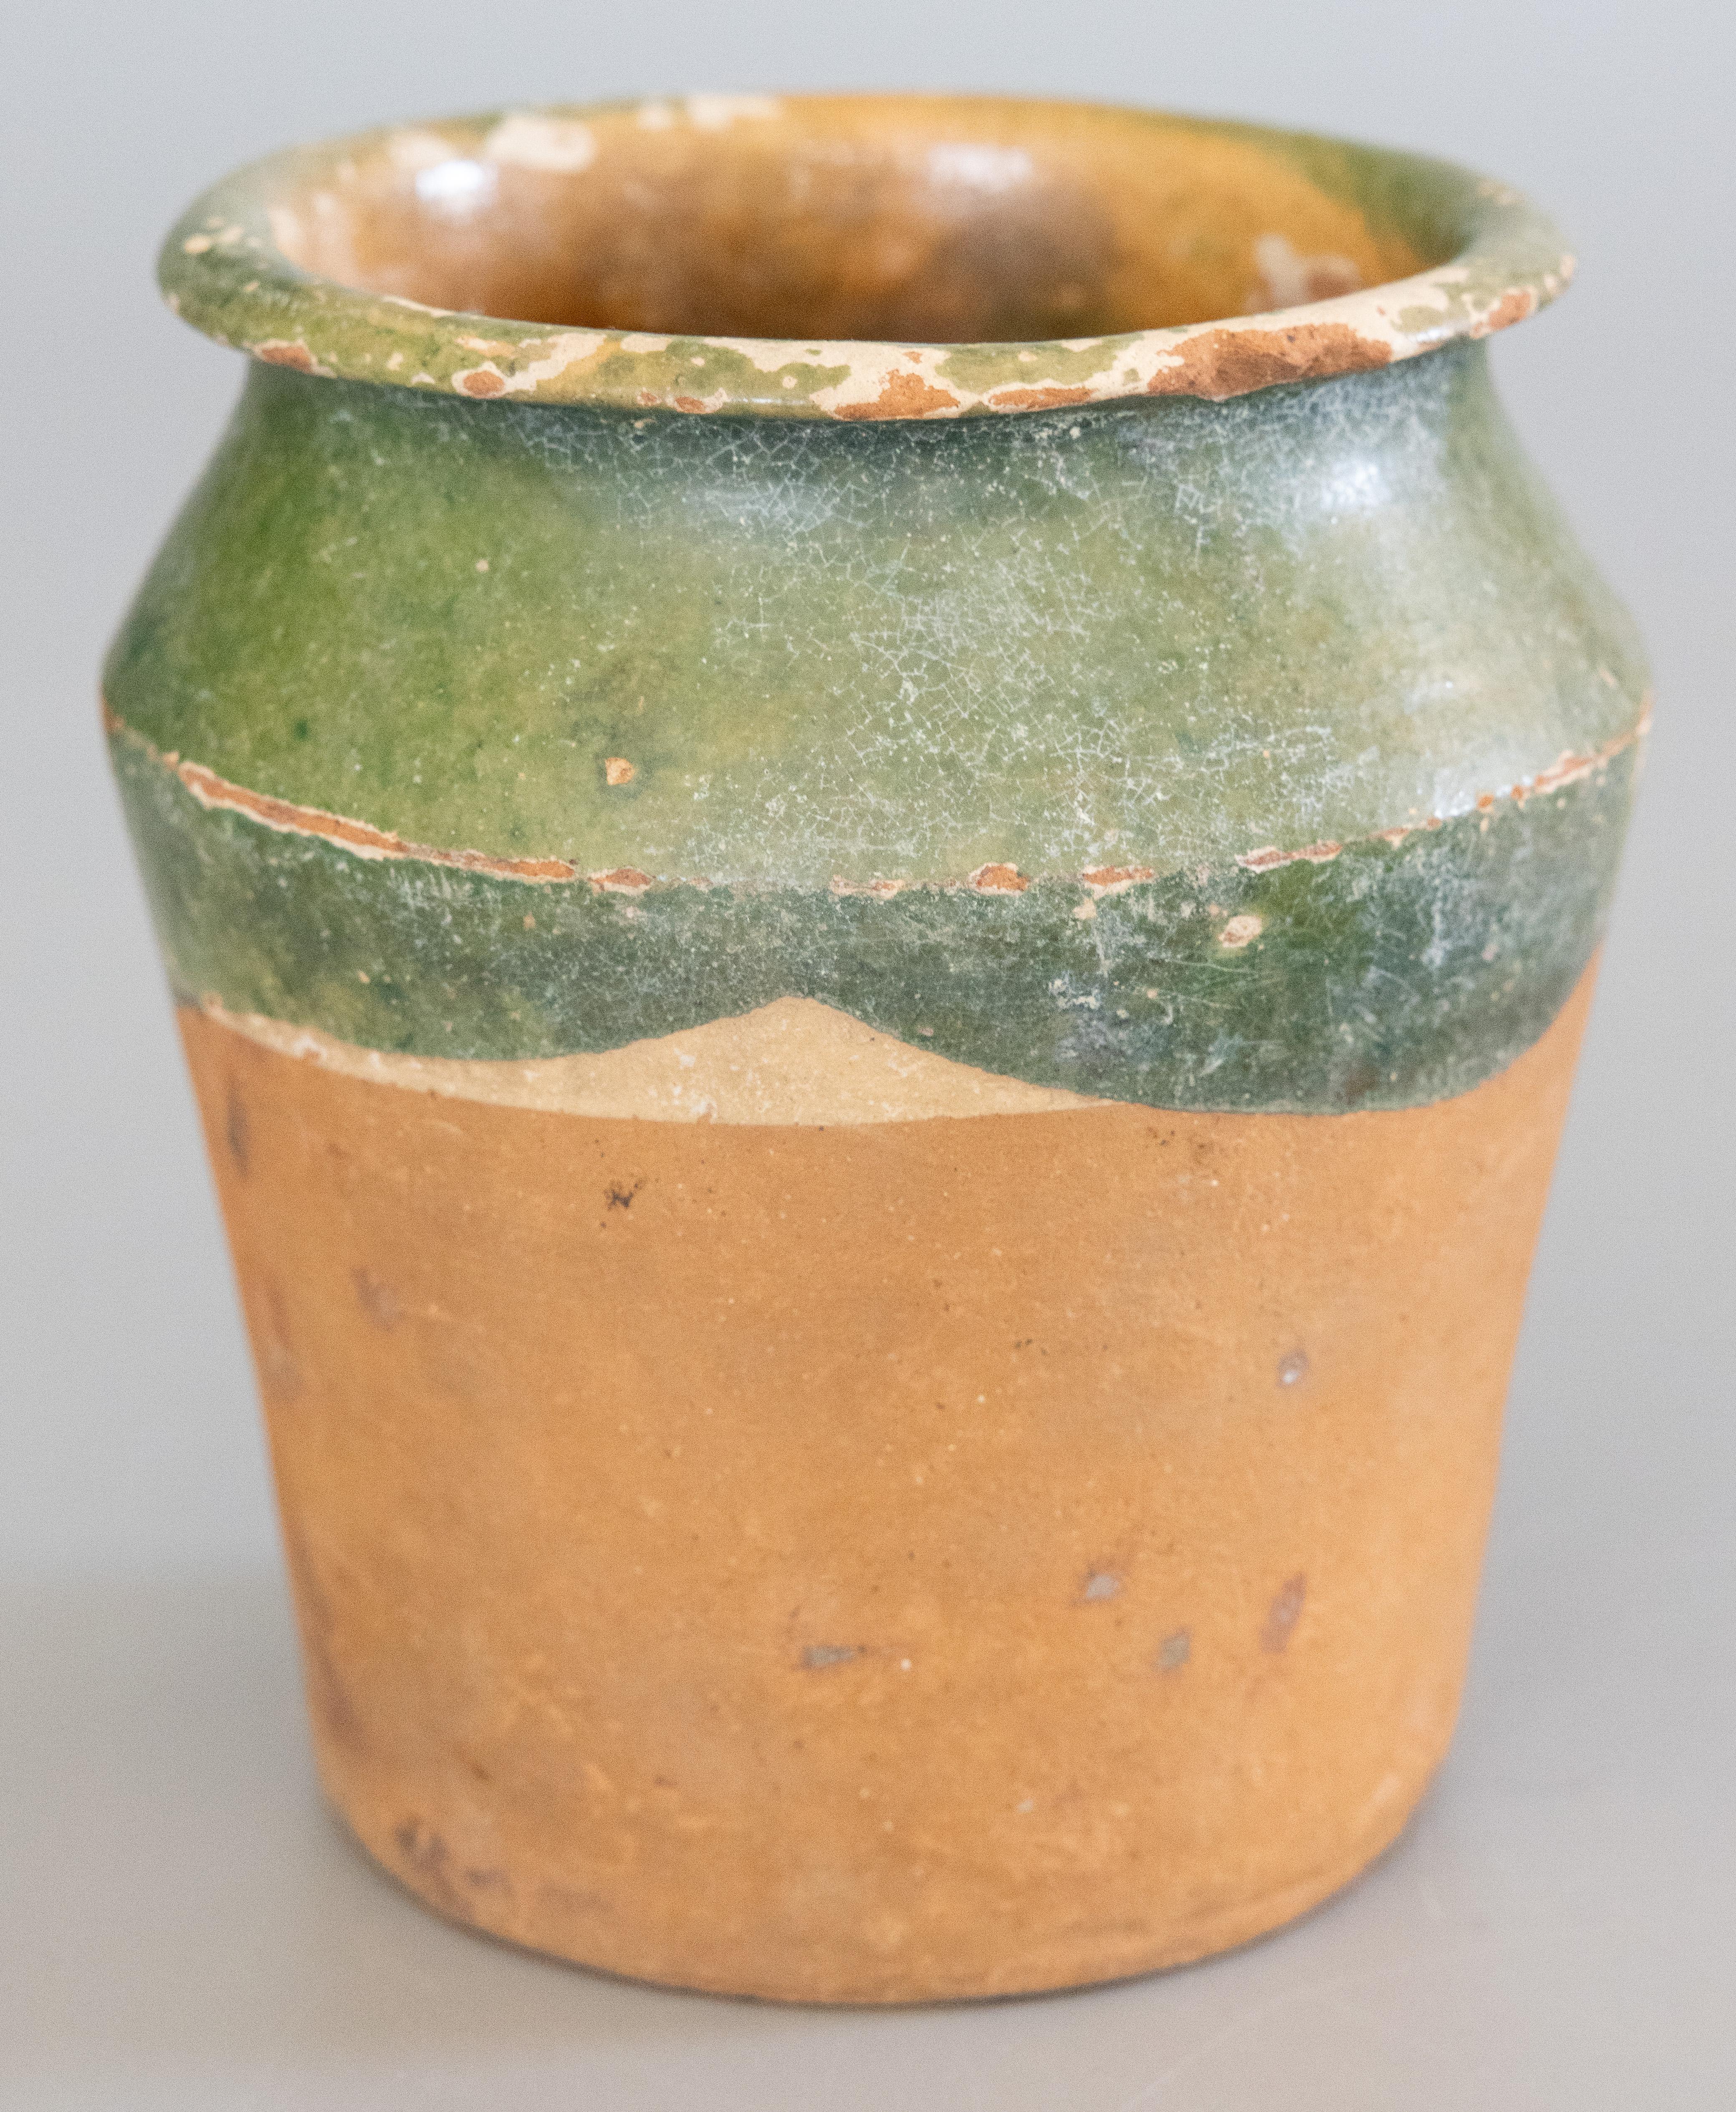 A charming 19th century French confit pot with a wonderful green glaze. Sourced from the South of France, Castelnaudary. These jars were used for storing and preserving cooked meat, and would be beautiful today with a bouquet of flowers or used in